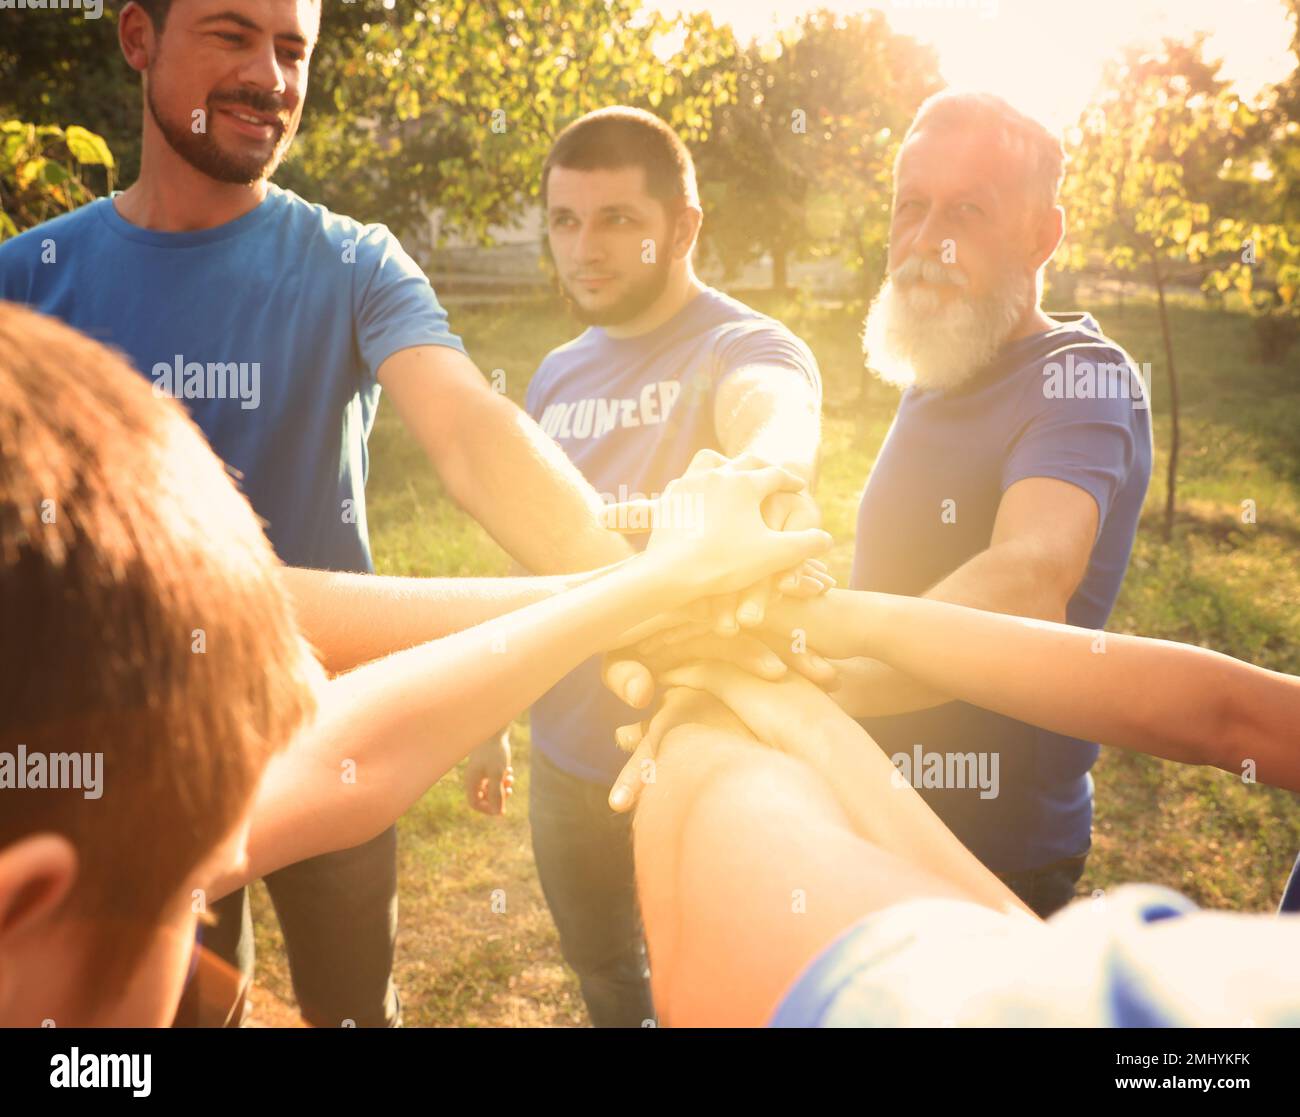 Group of volunteers joining hands together outdoors on sunny day Stock Photo